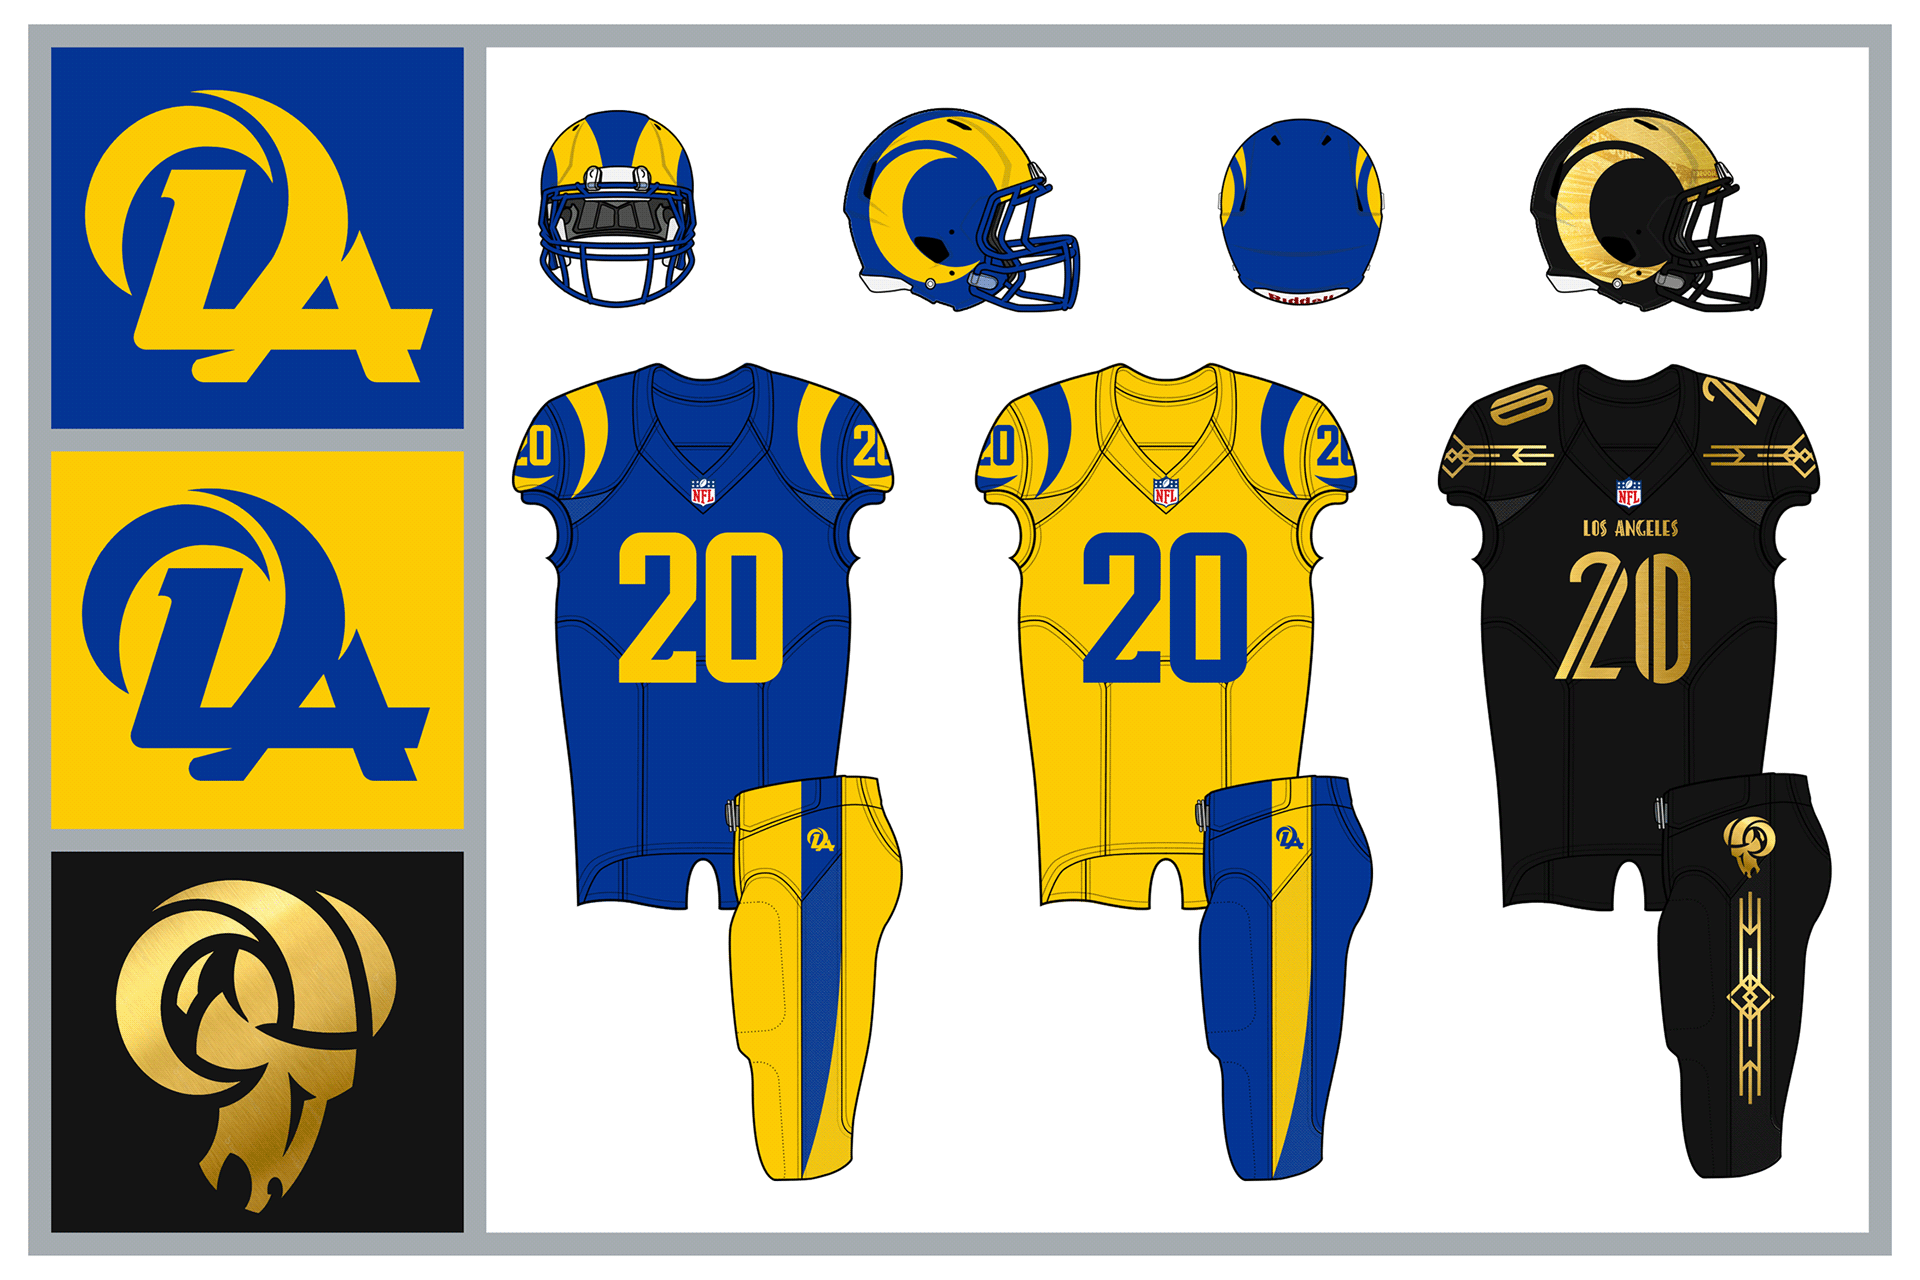 LOS ANGELES RAMS: The Rams uniforms return to a classic look, with a yellow  away in place of white. The Hollywood alternate uses LA's art deco design  and metallic gold.